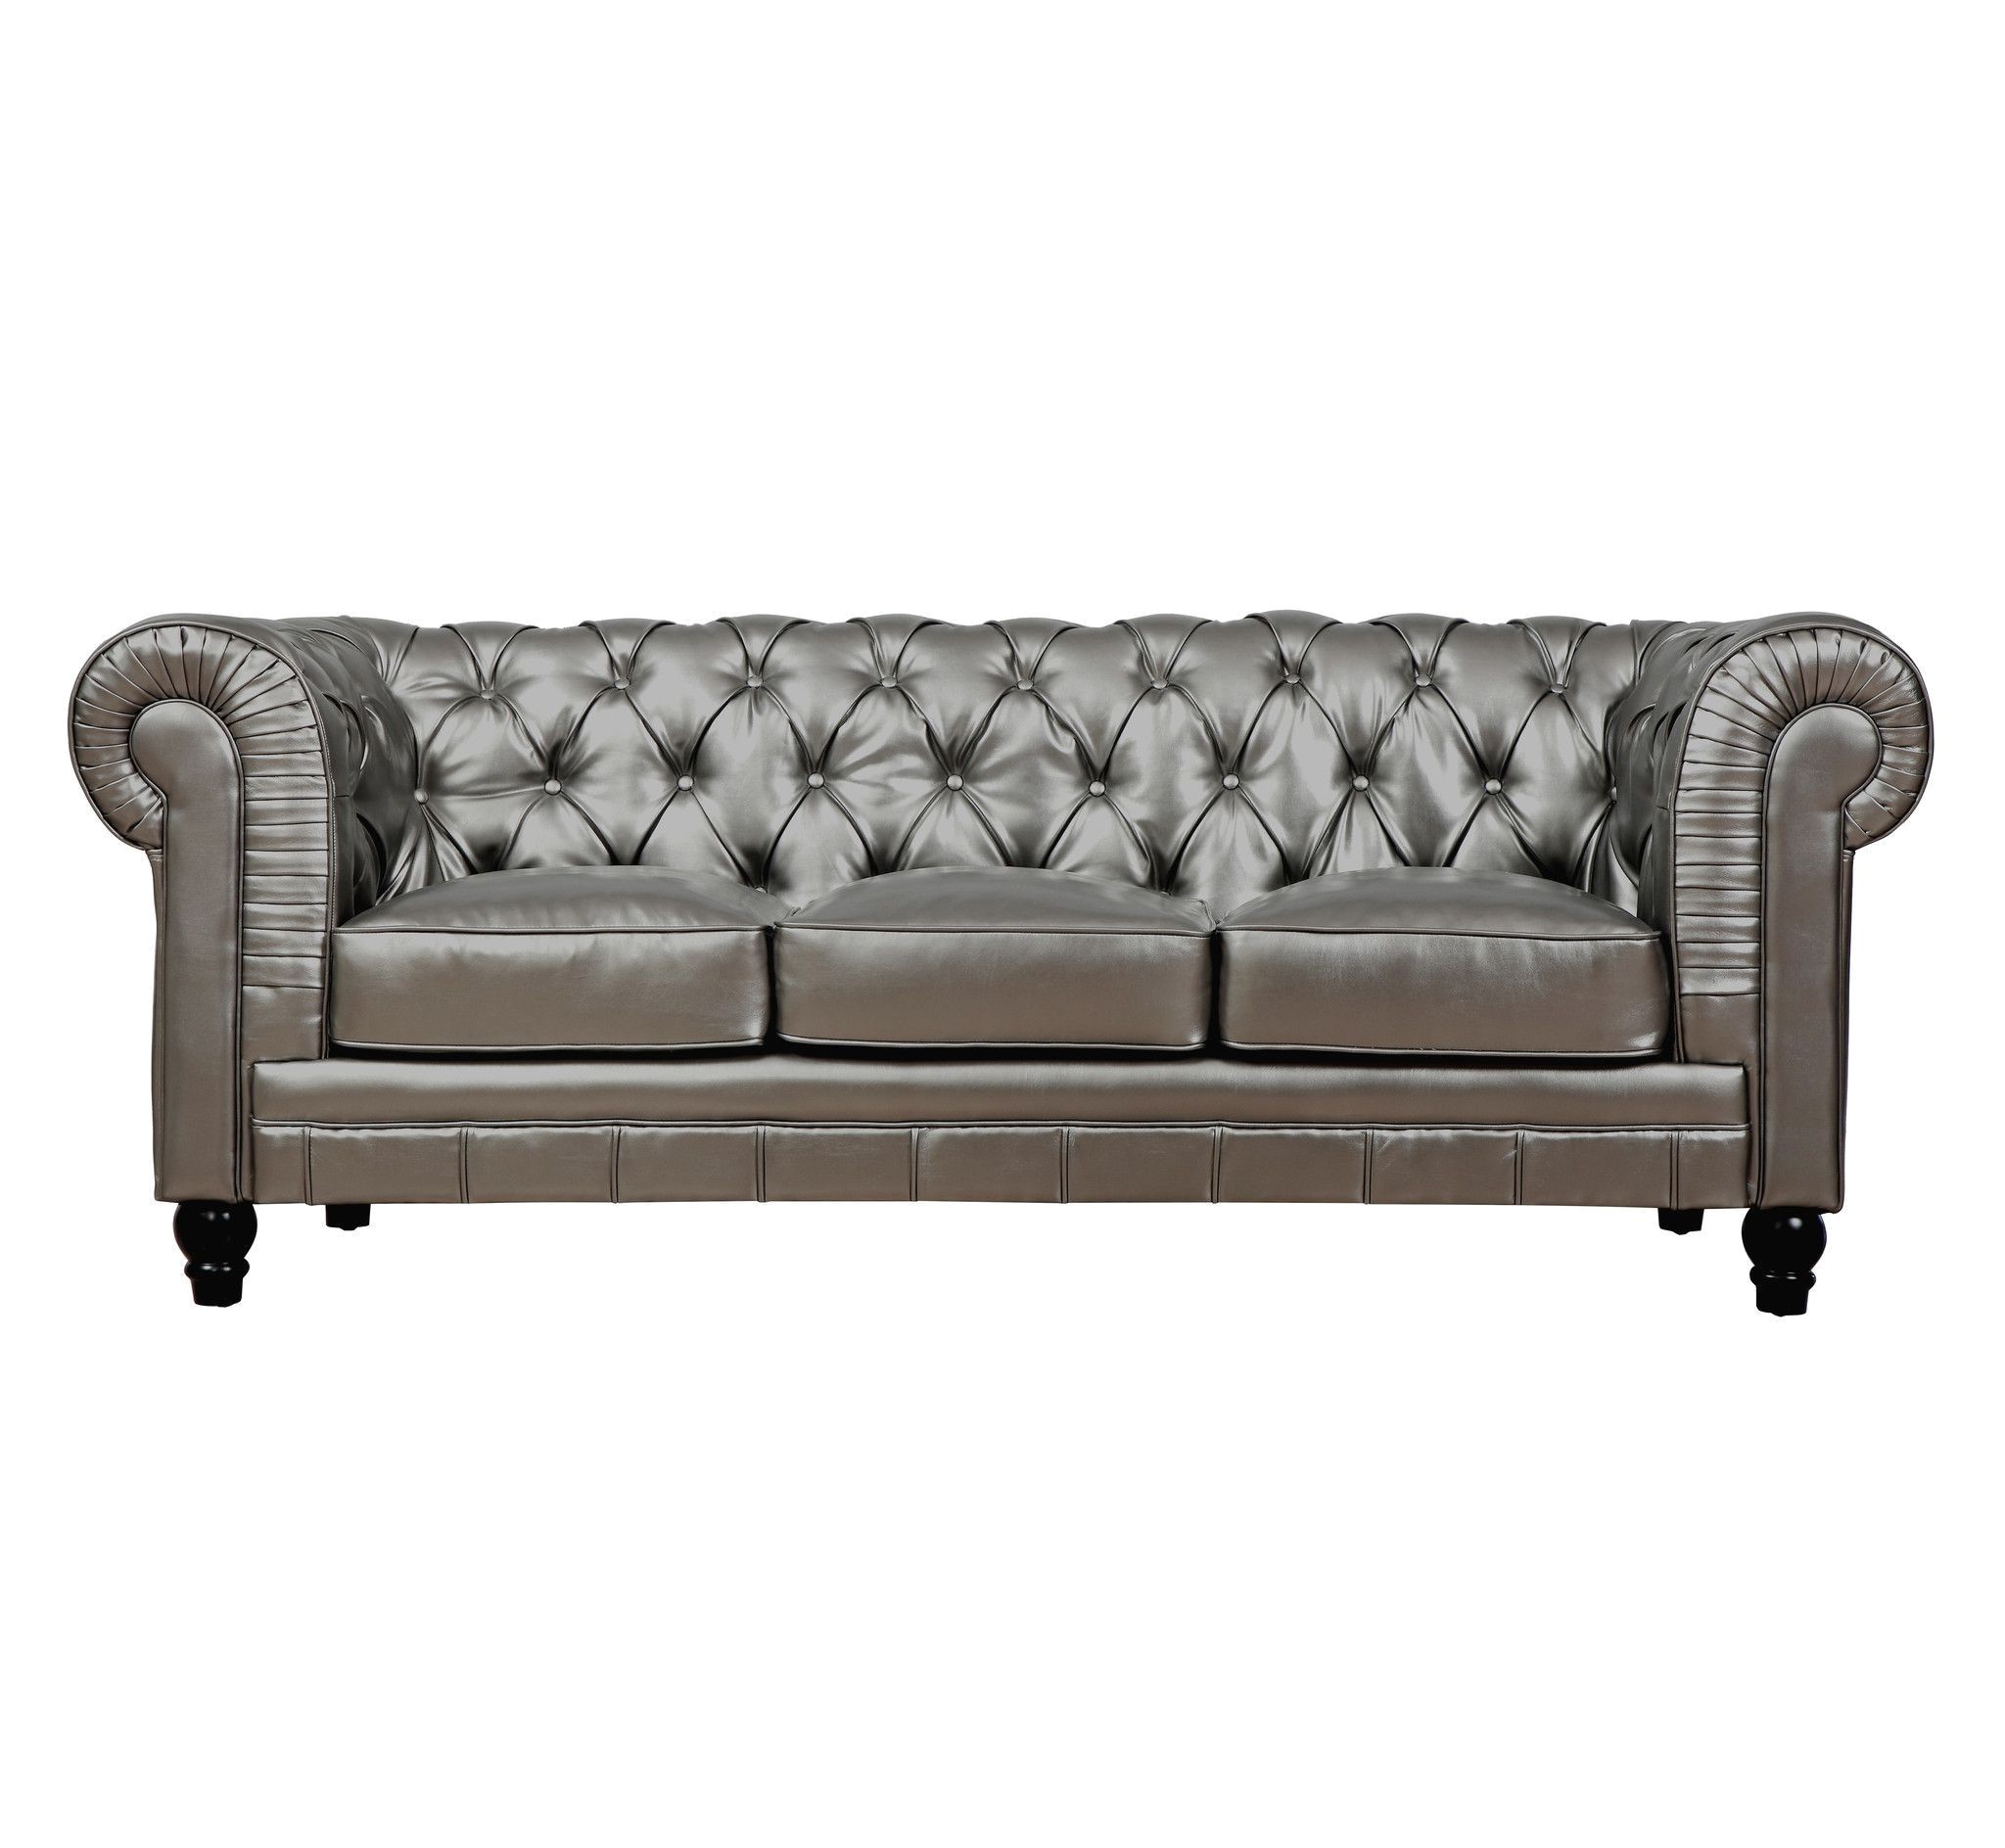 a modern interpretation of the classic chesterfield design this handcrafted sofa will add style and timeless appeal to any room